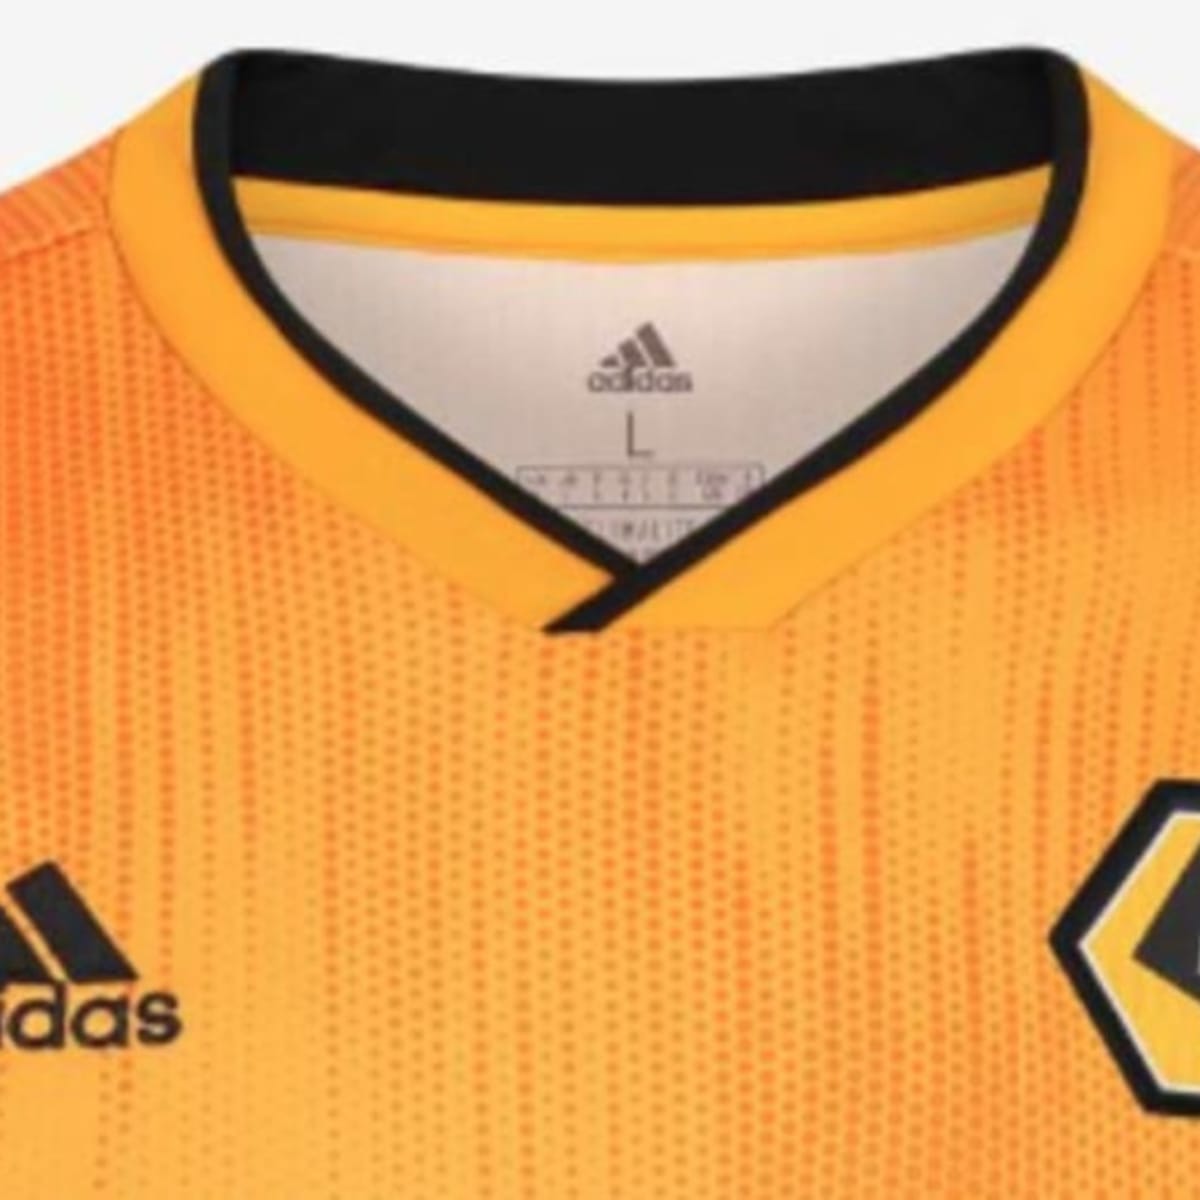 Wolves' new shirt sponsor is W88 - but who are they?